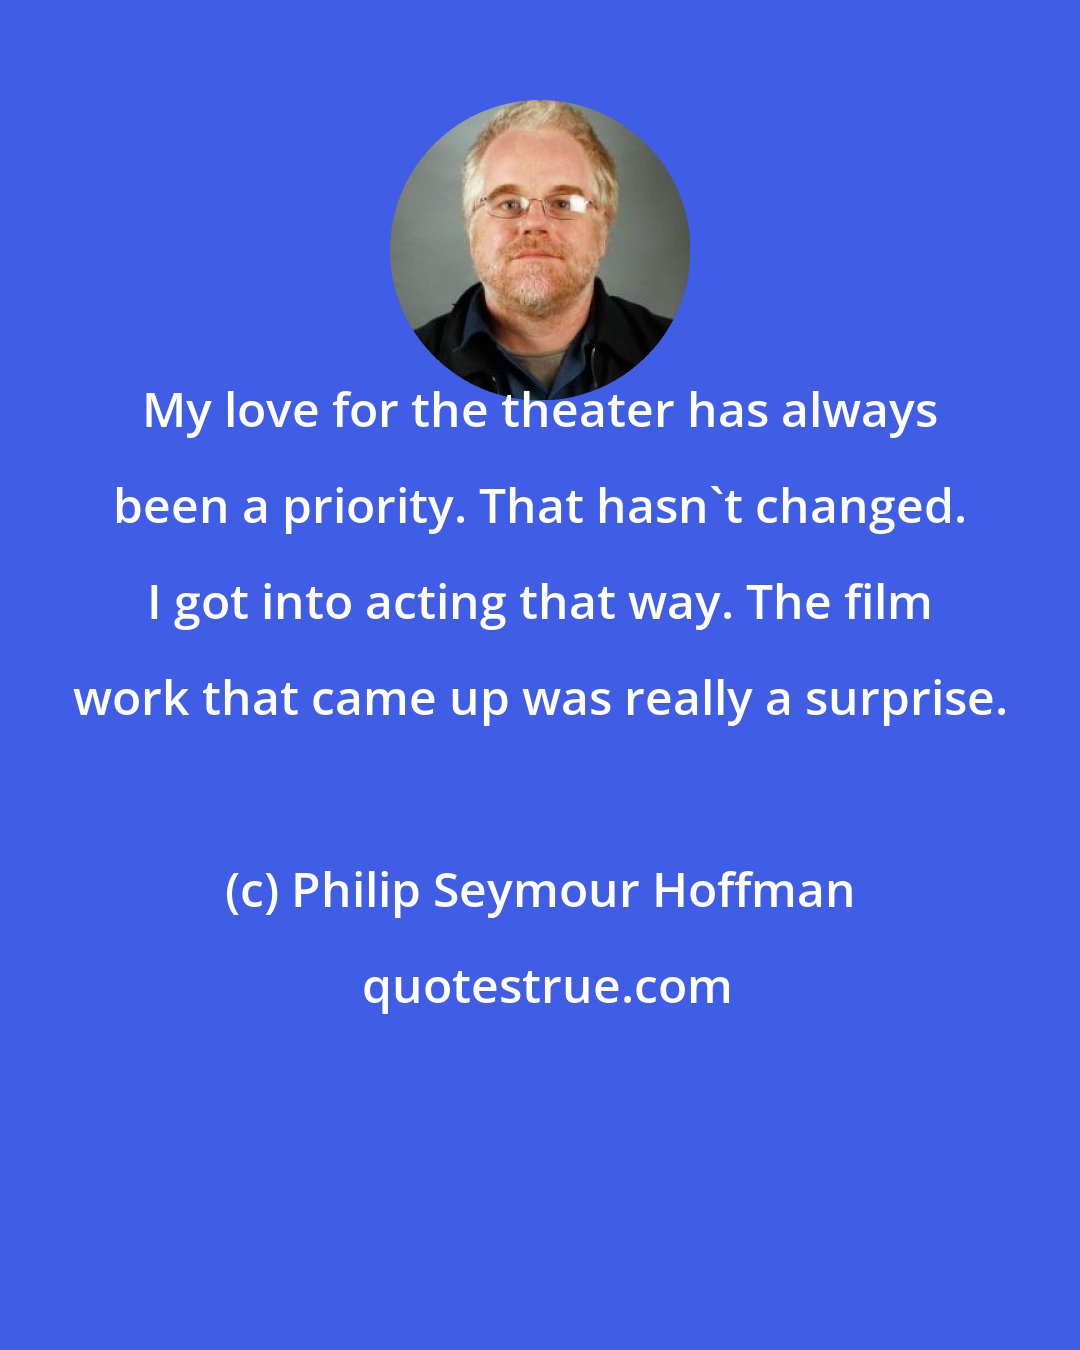 Philip Seymour Hoffman: My love for the theater has always been a priority. That hasn't changed. I got into acting that way. The film work that came up was really a surprise.